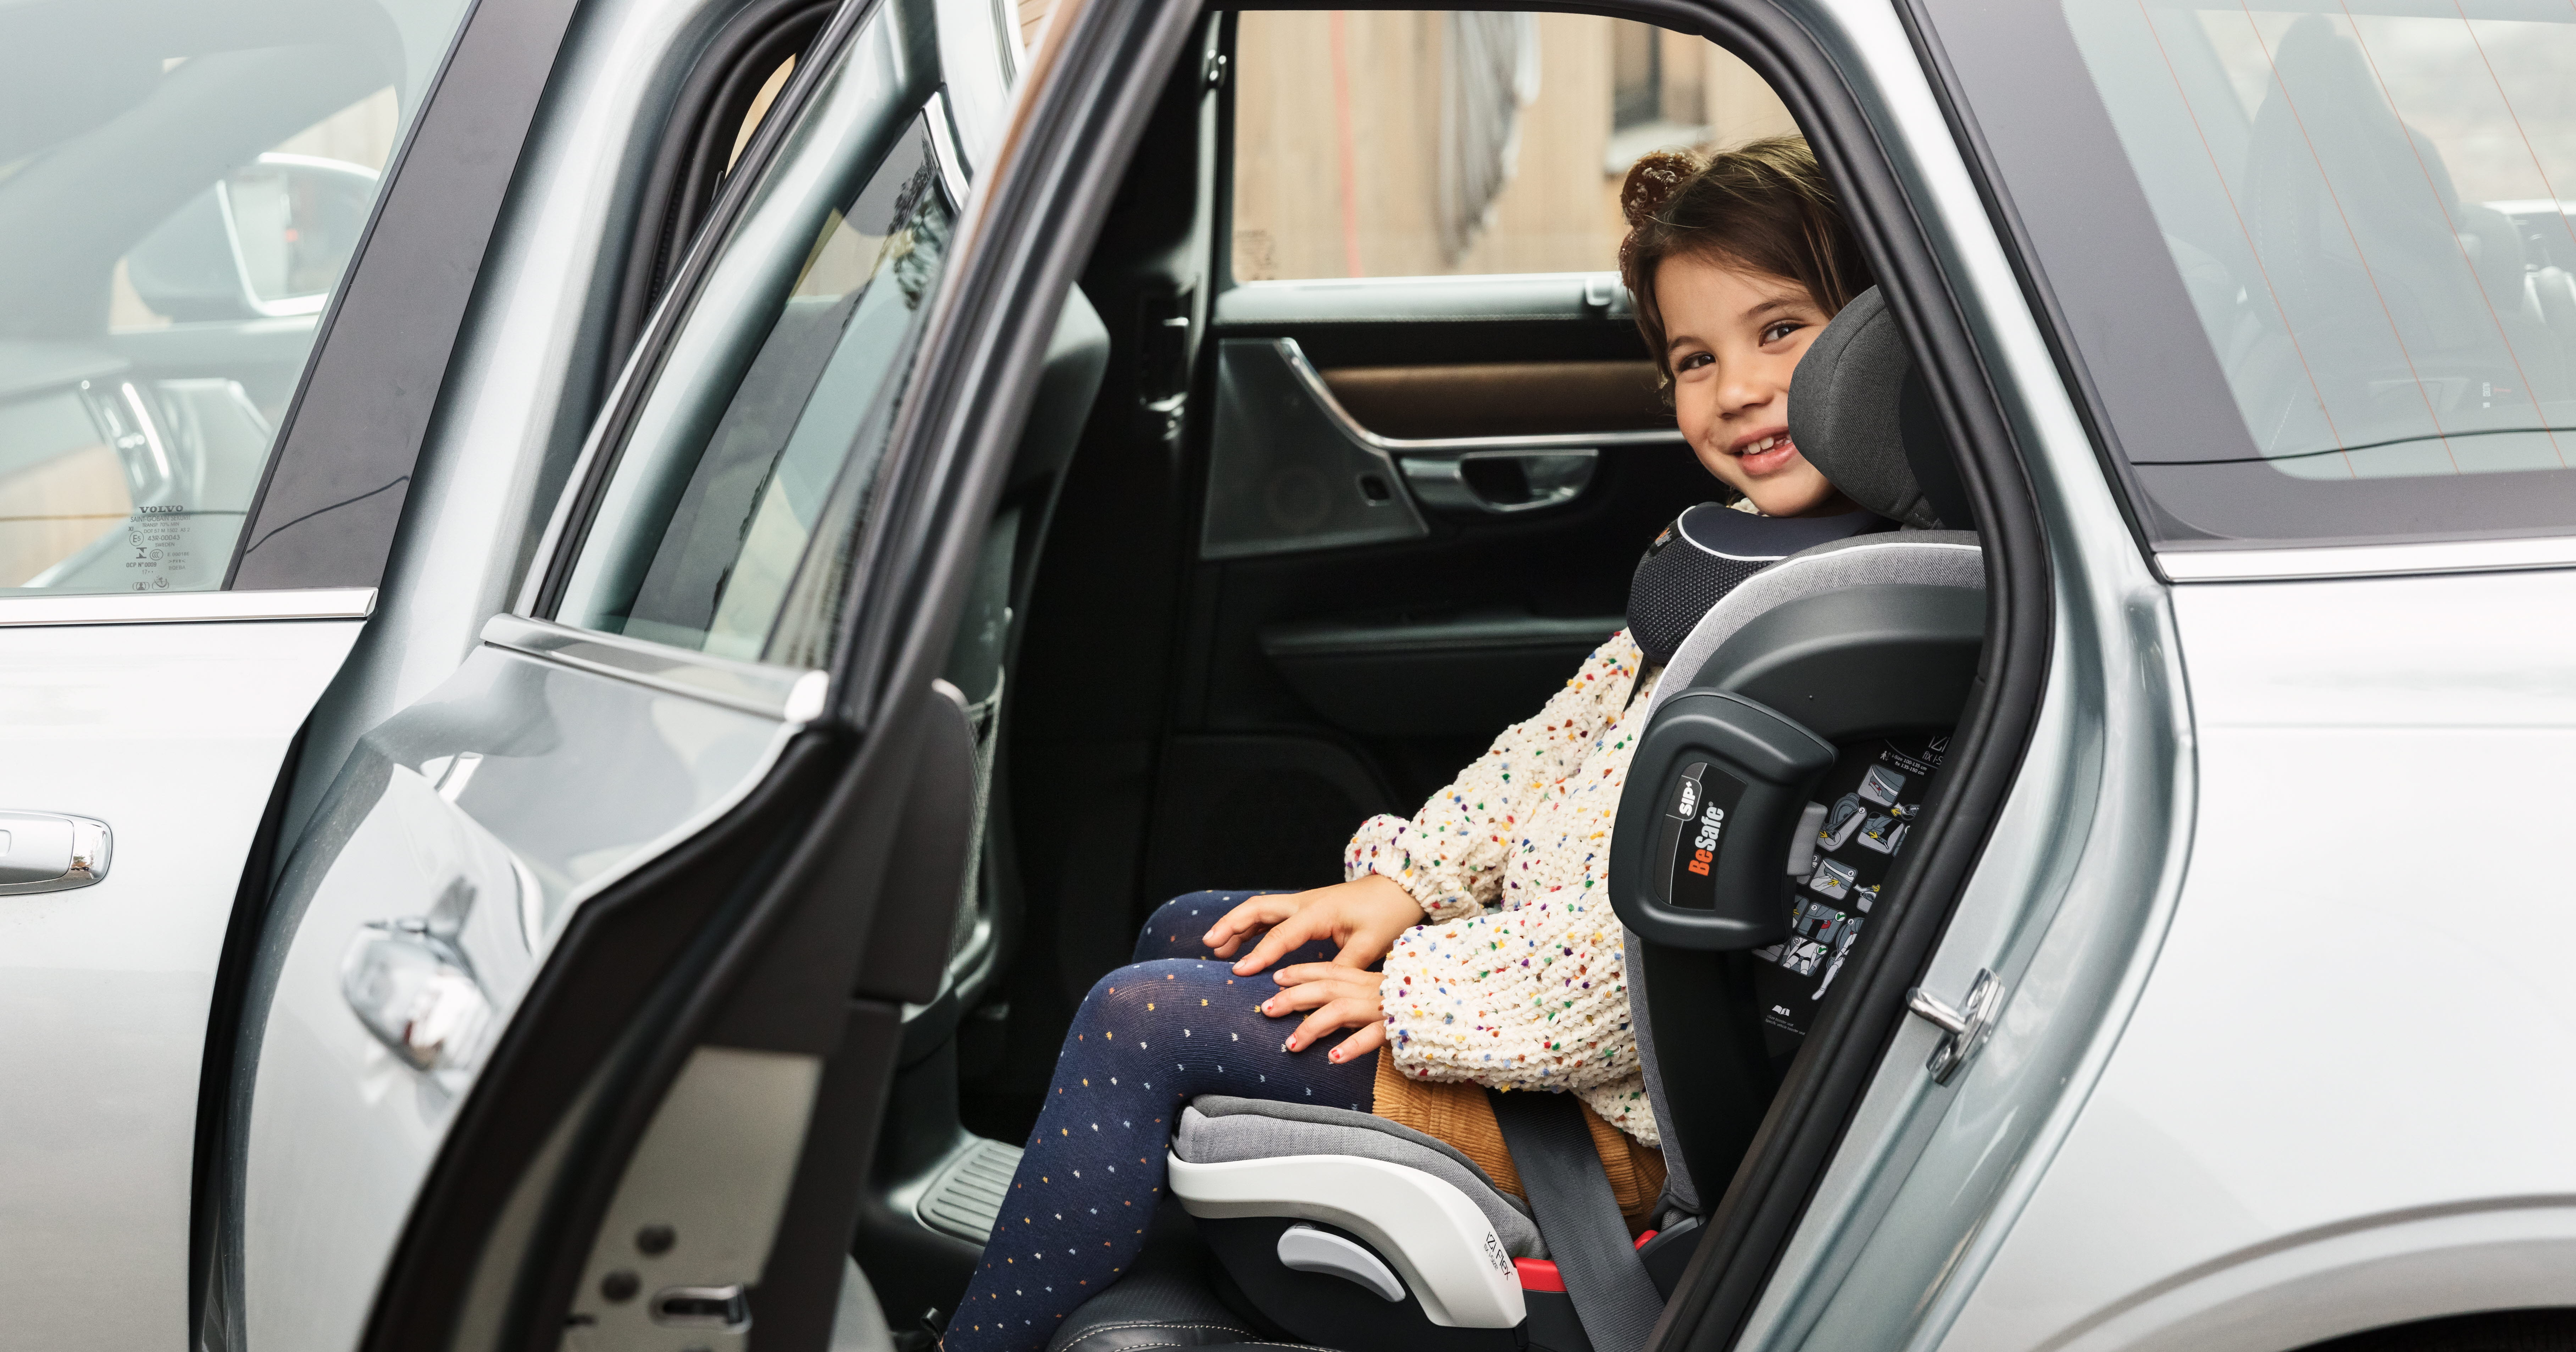 When to Switch to a Booster Seat – Children's Health